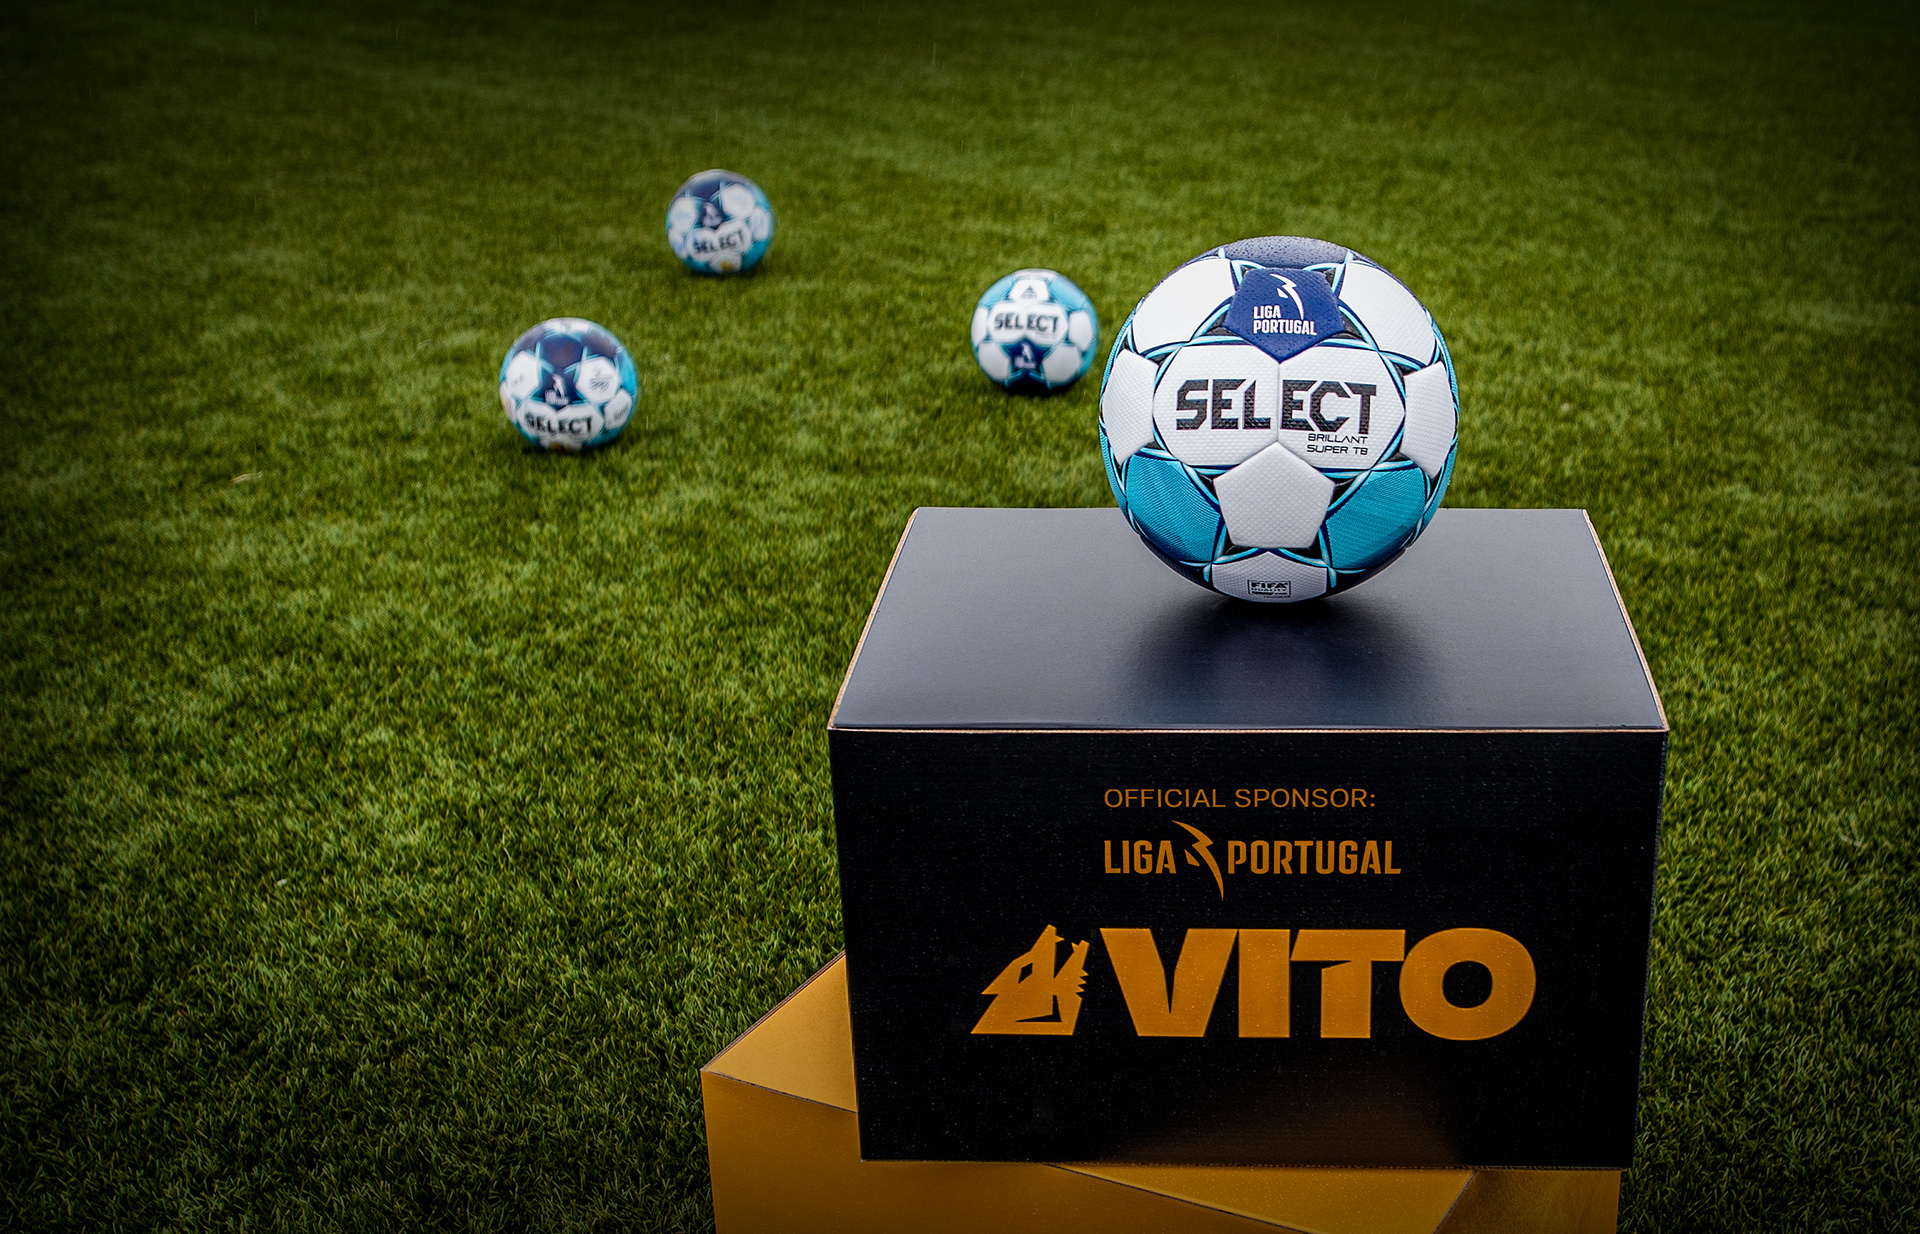 VITO and Liga Portugal join forces in a Champions partnership